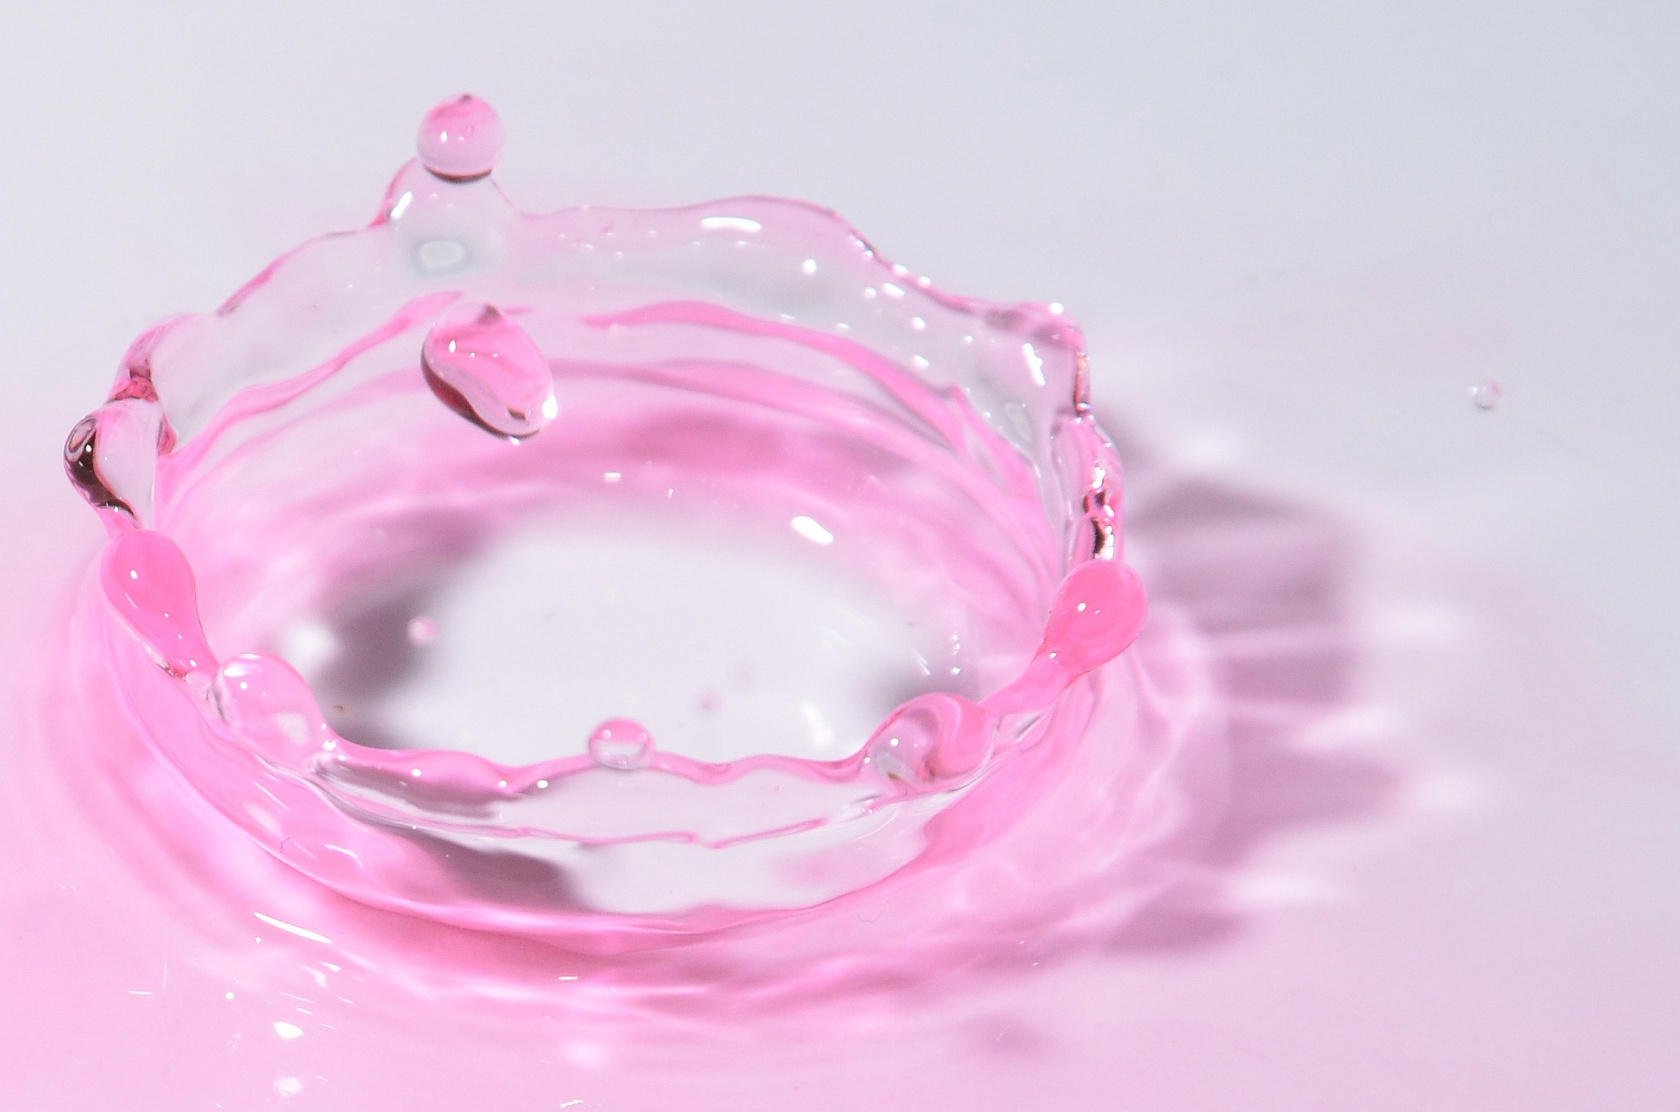 5 Tips for Water Droplet Photography Image4